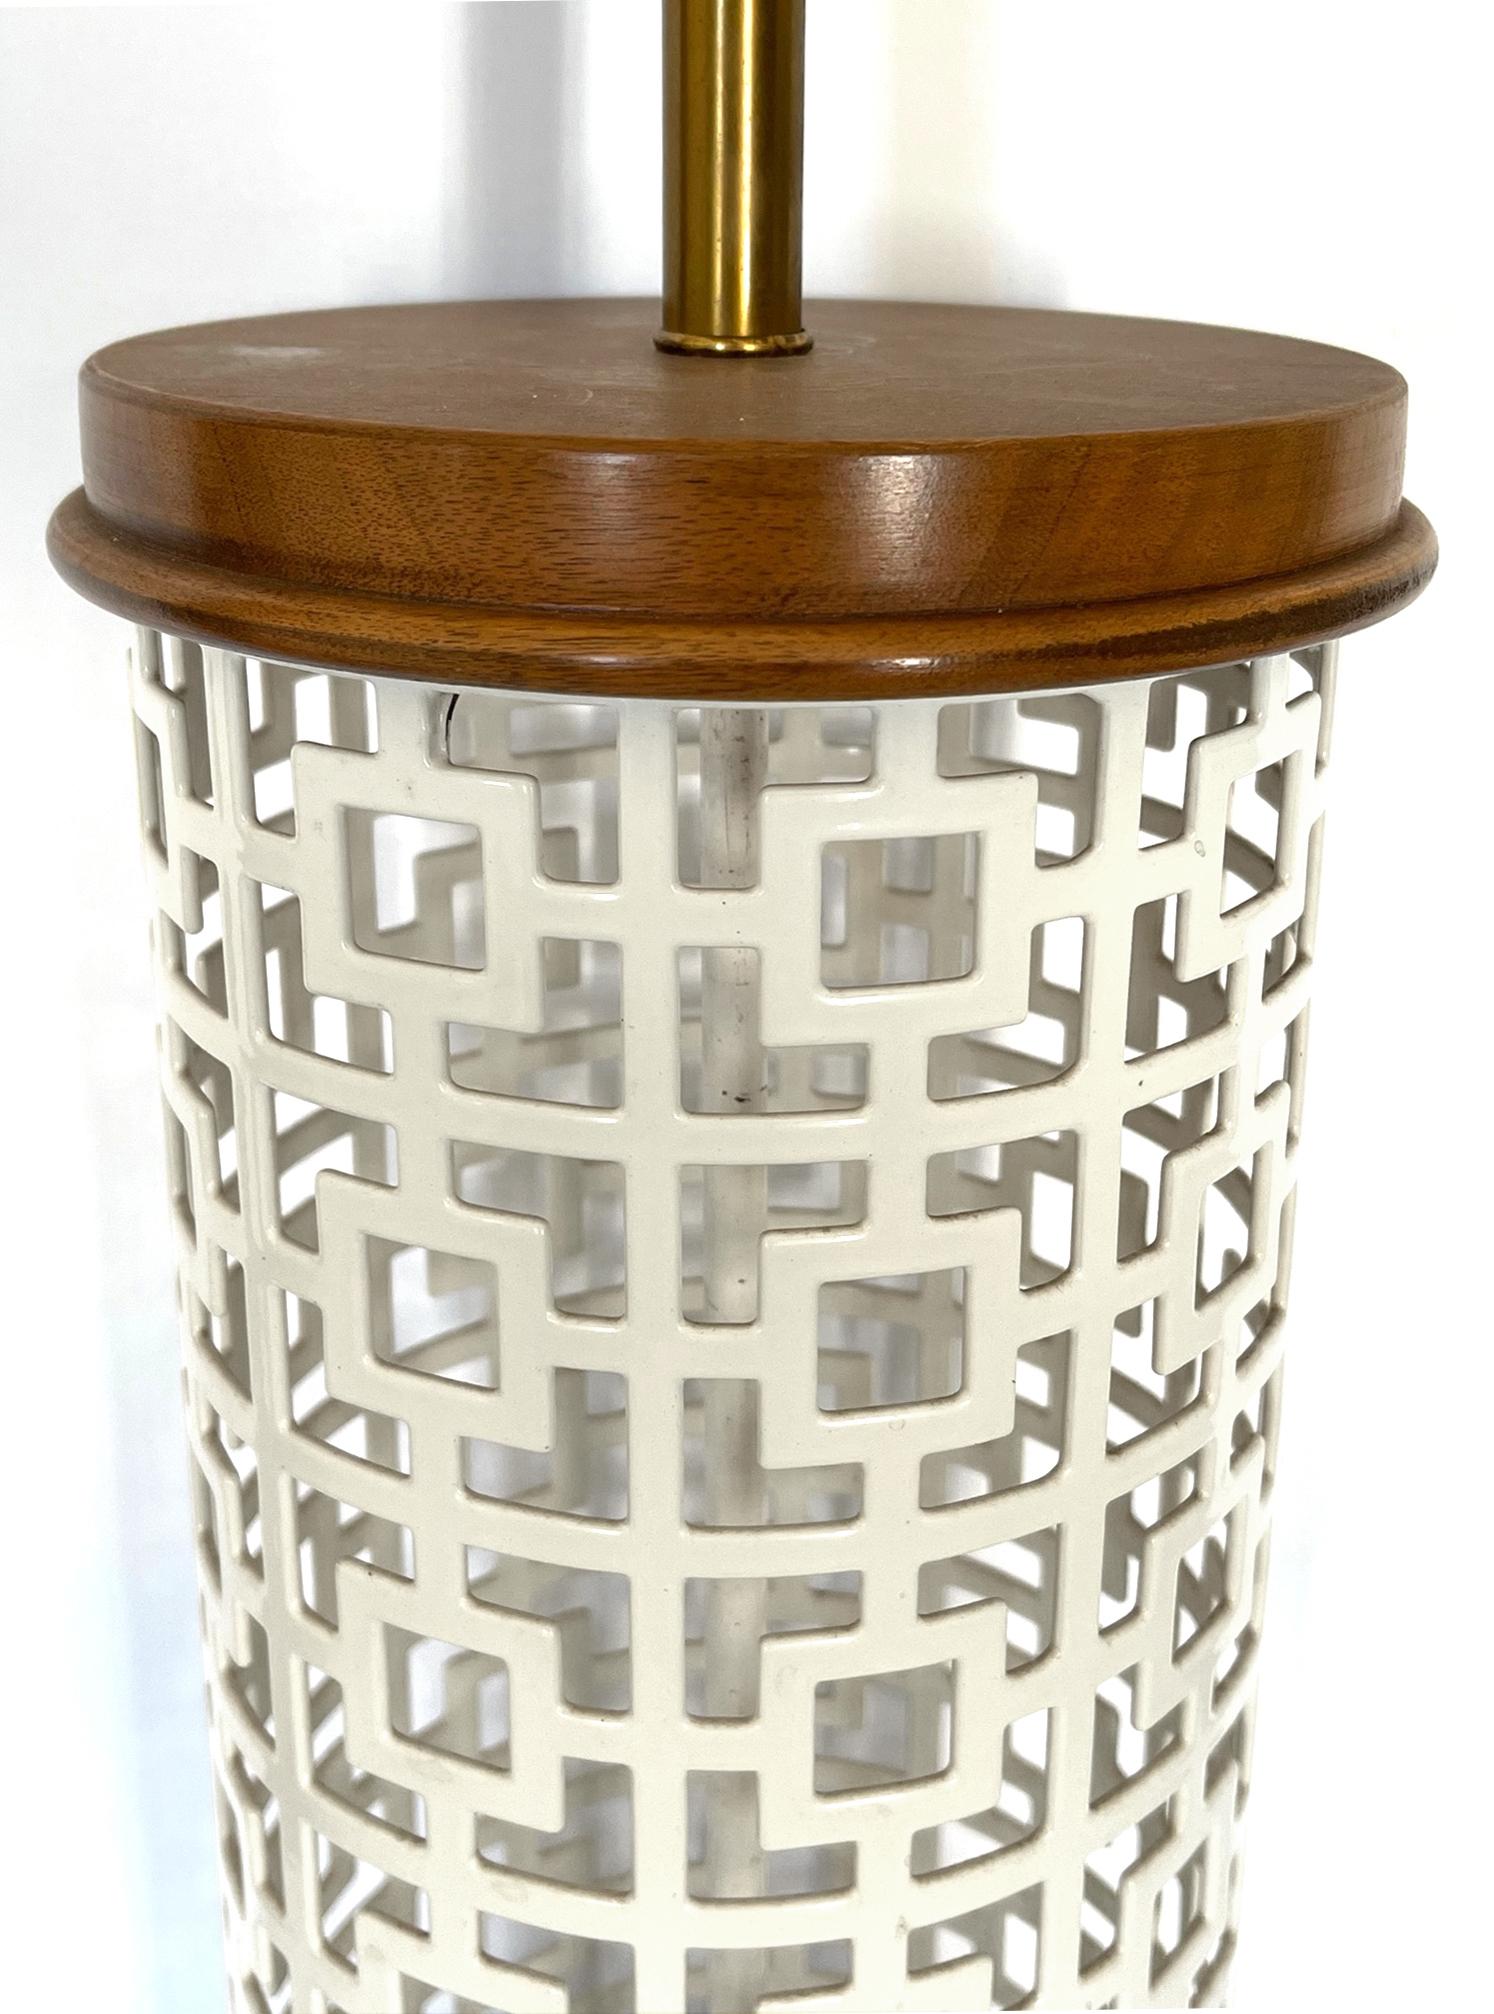 each cylindrical lamp of openwork geometric enameled-metal with wooden caps and bases